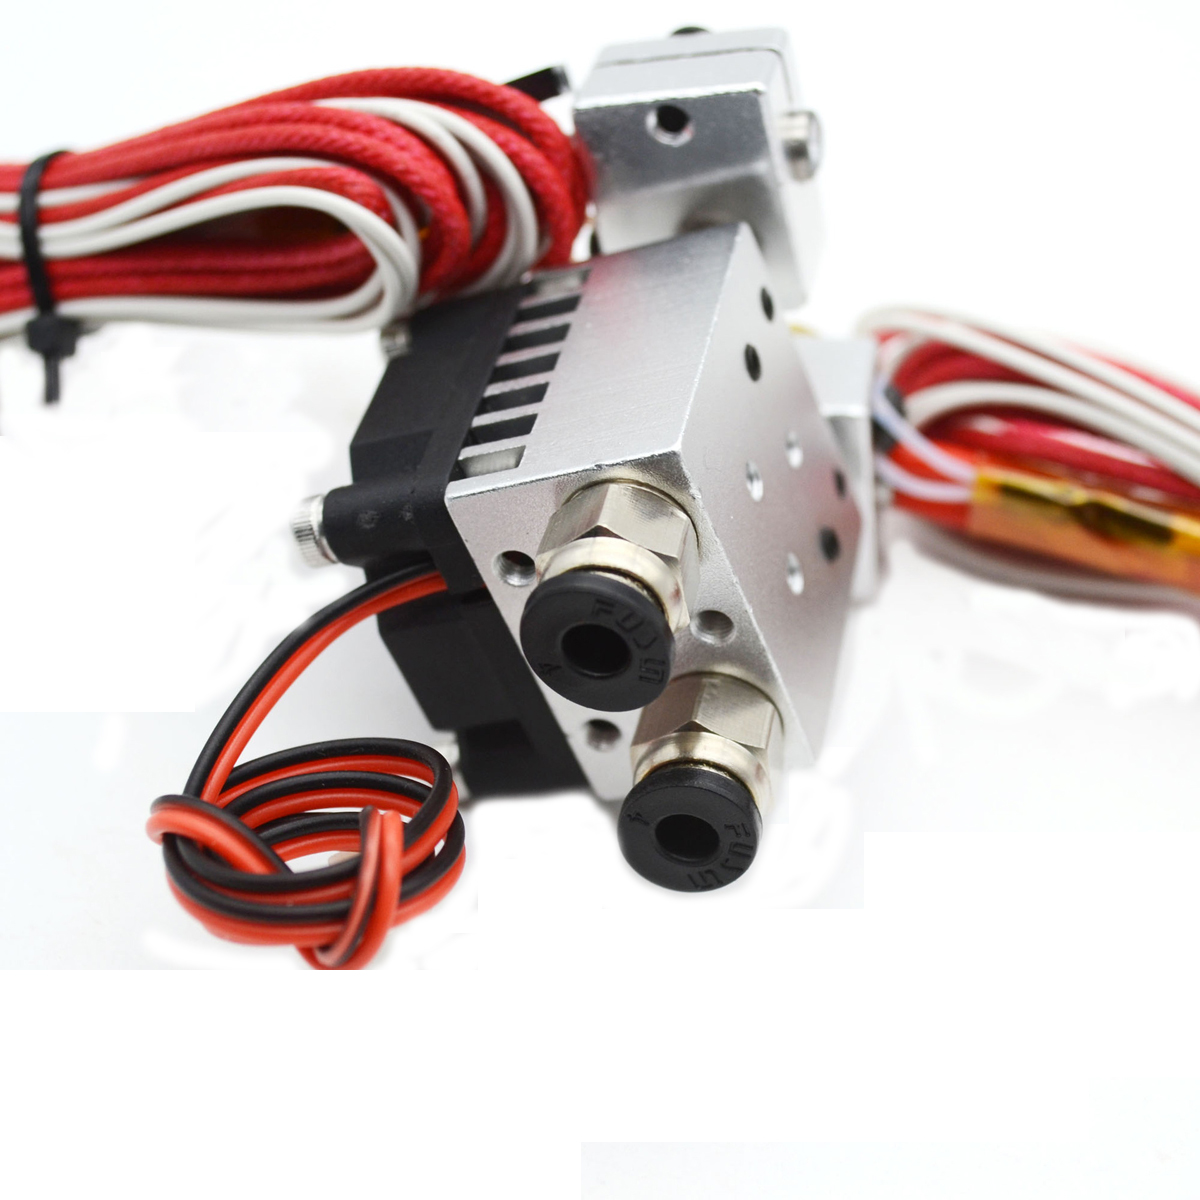 1.75mm/3.0mm Fialment 0.4mm Nozzle Upgraded Dual Head Extruder Kit for 3D Printer 15